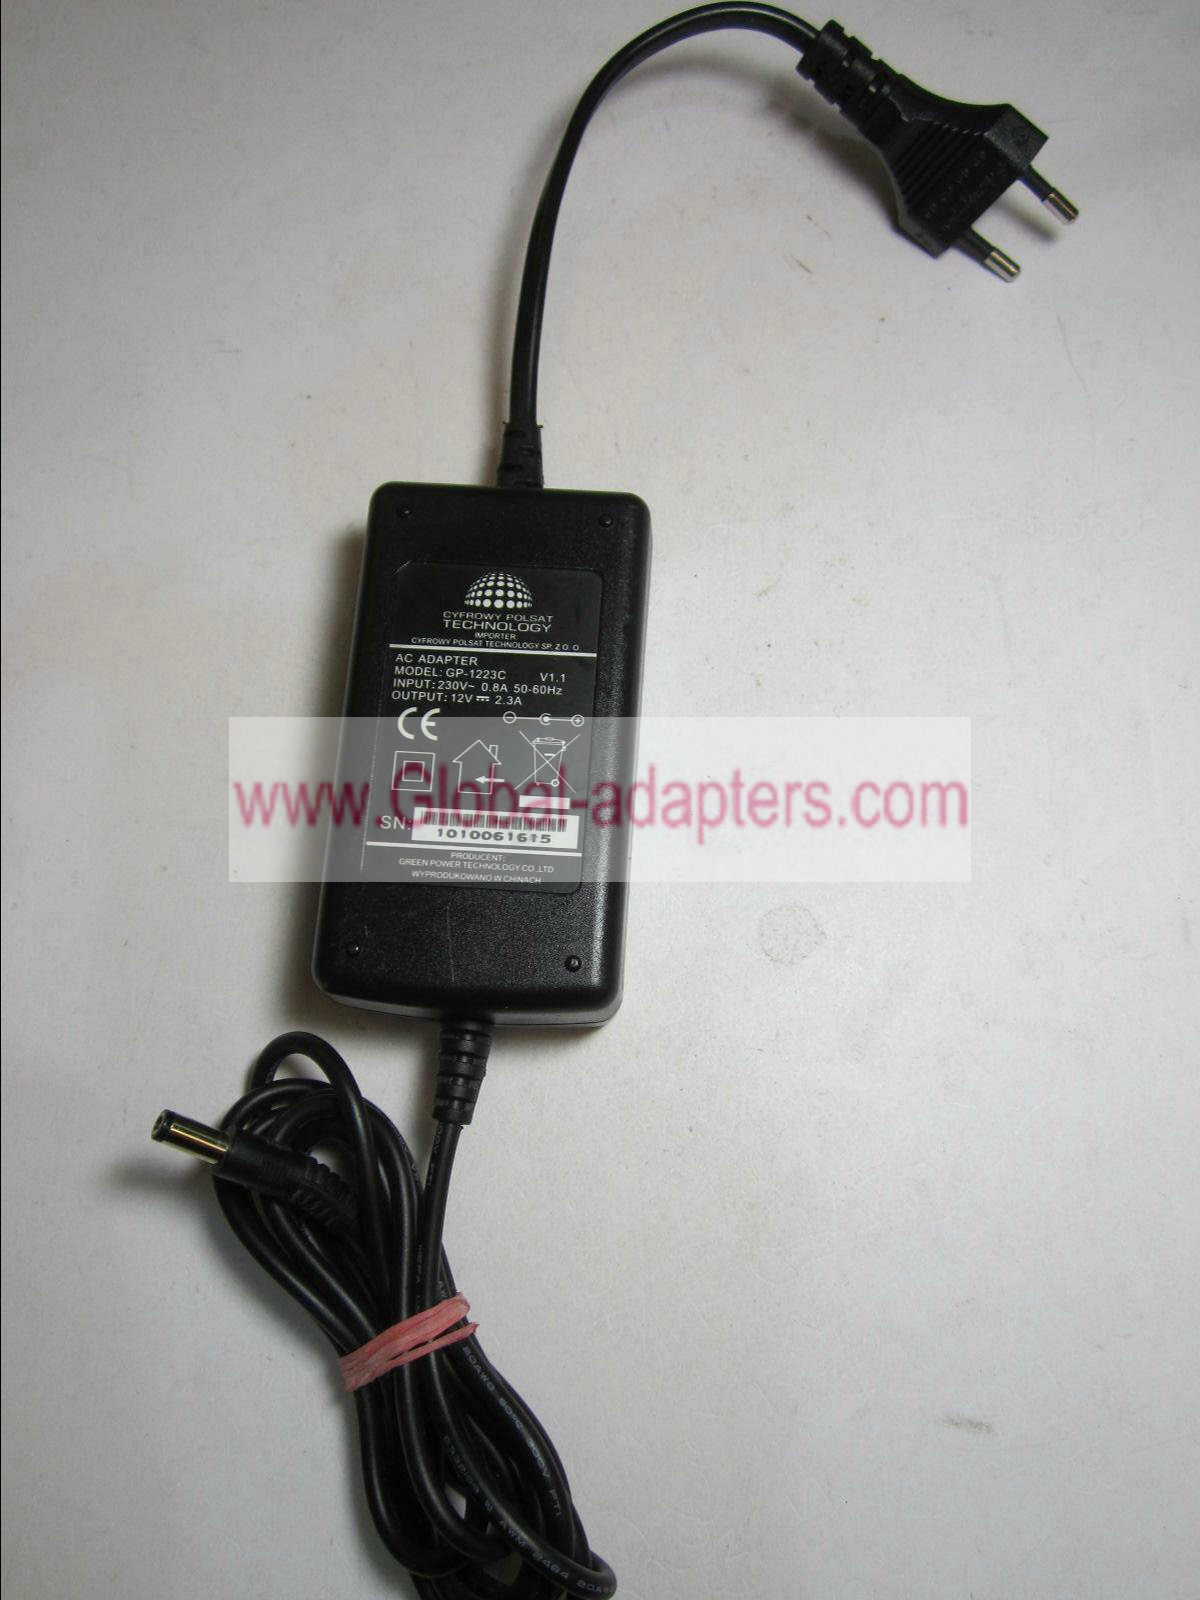 New 12V 2.3A AC ADAPTOR POWER SUPPLY FOR LACIE GP-ACW030A-12T GPC-ACD048A-12 PSU PART 5.5mm x 2.1mm